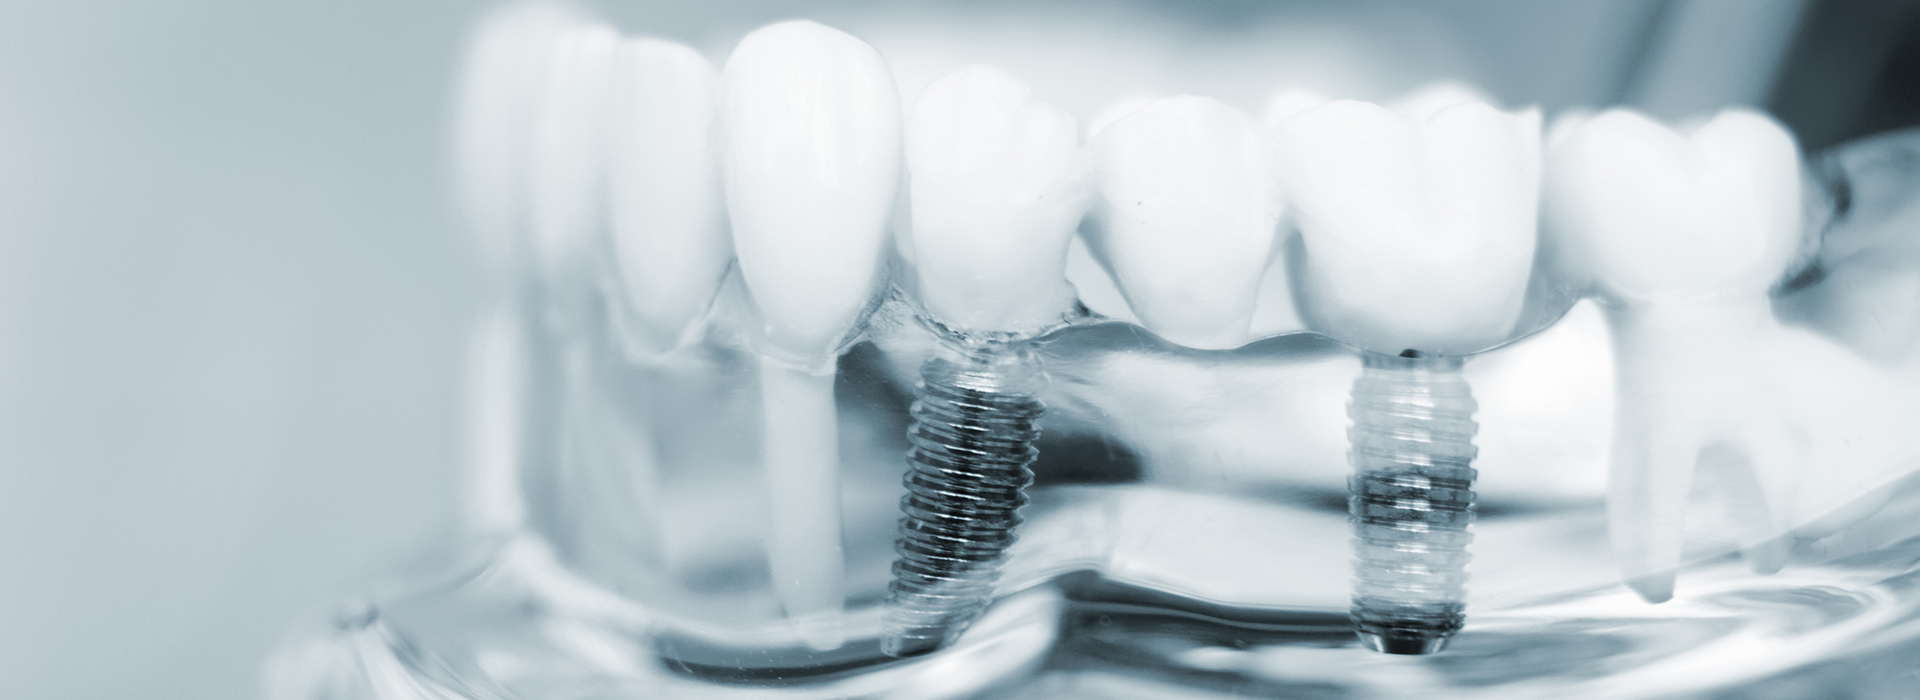 Mann Dental Care | Cosmetic Dentistry, Sedation Dentistry and Root Canals